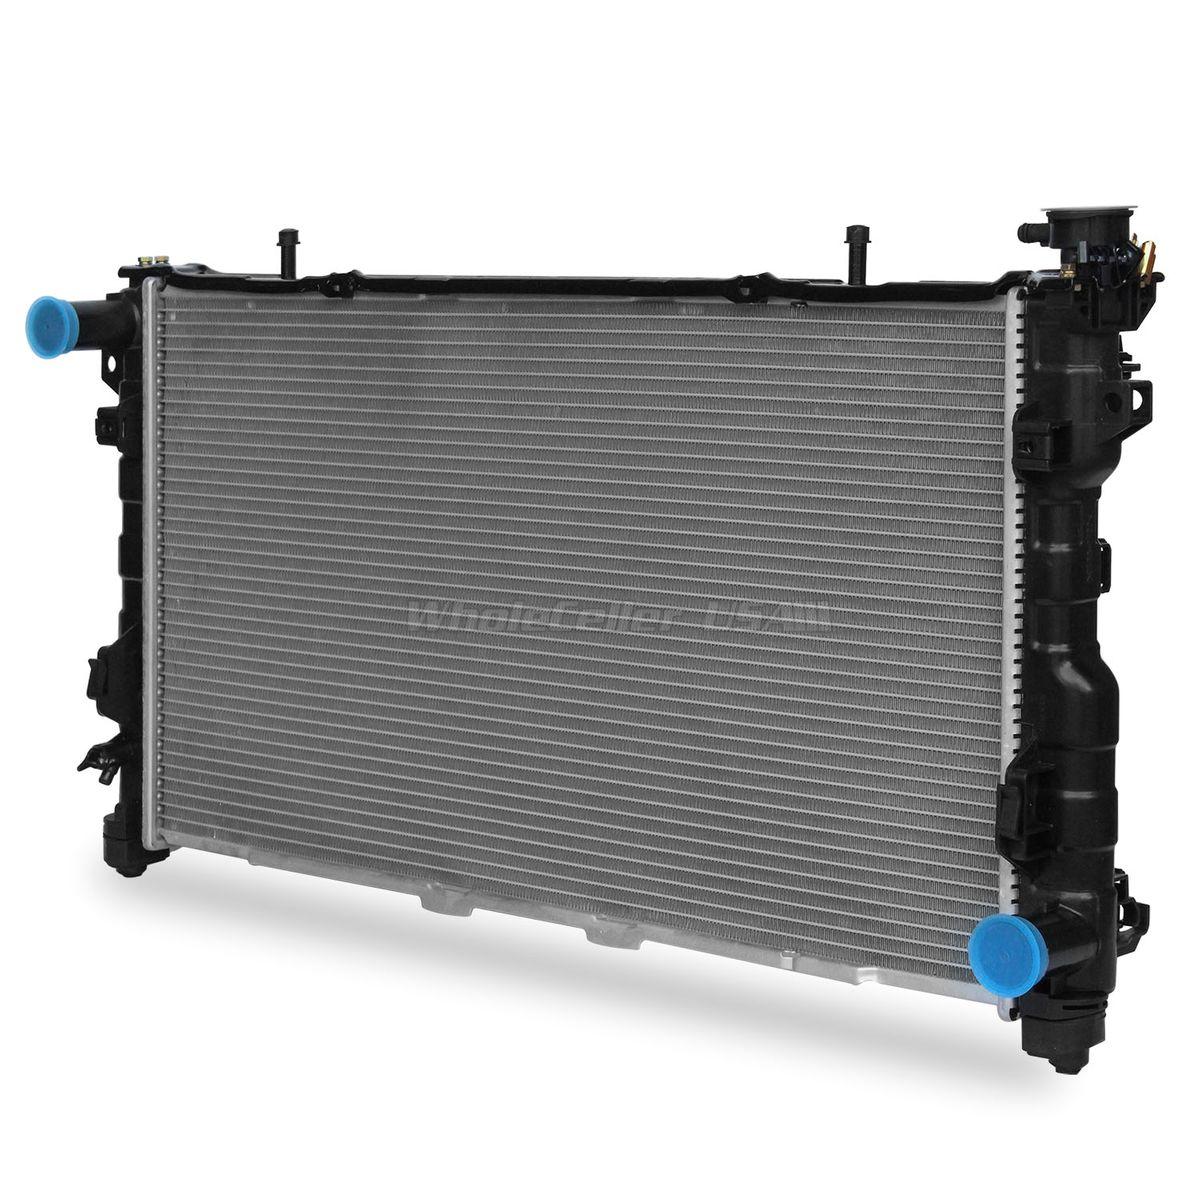 2795 RADIATOR FOR CHRYSLER TOWN/COUNTRY VOYAGER 3.3L 3.8L V6 2005 2006 2007 | eBay Radiator For A 2006 Chrysler Town And Country